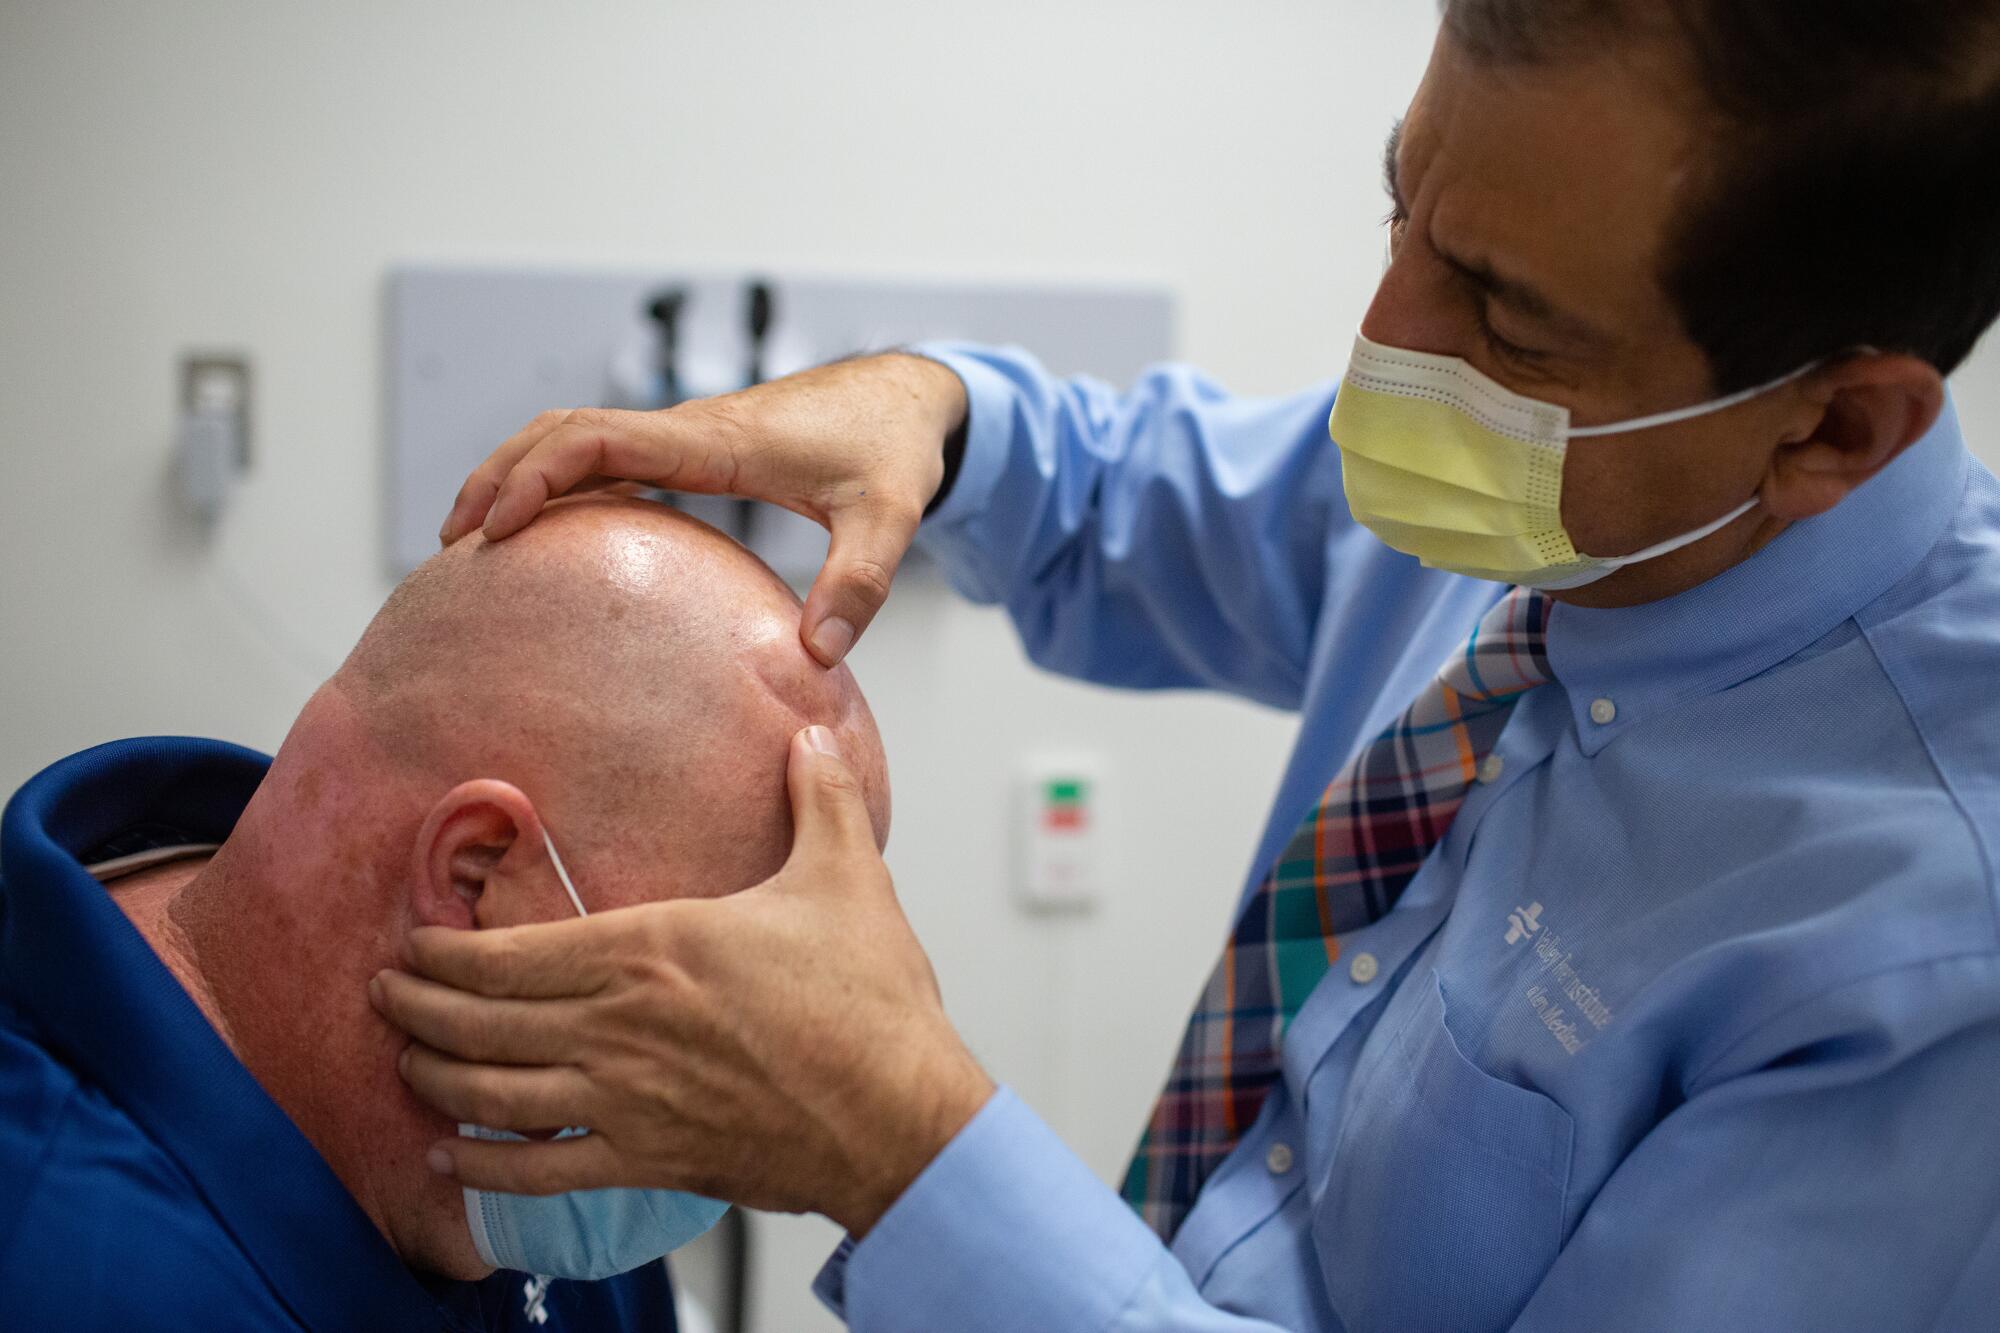 A physician examines the port on a man's head that is used to deliver medicine to treat his Valley fever.